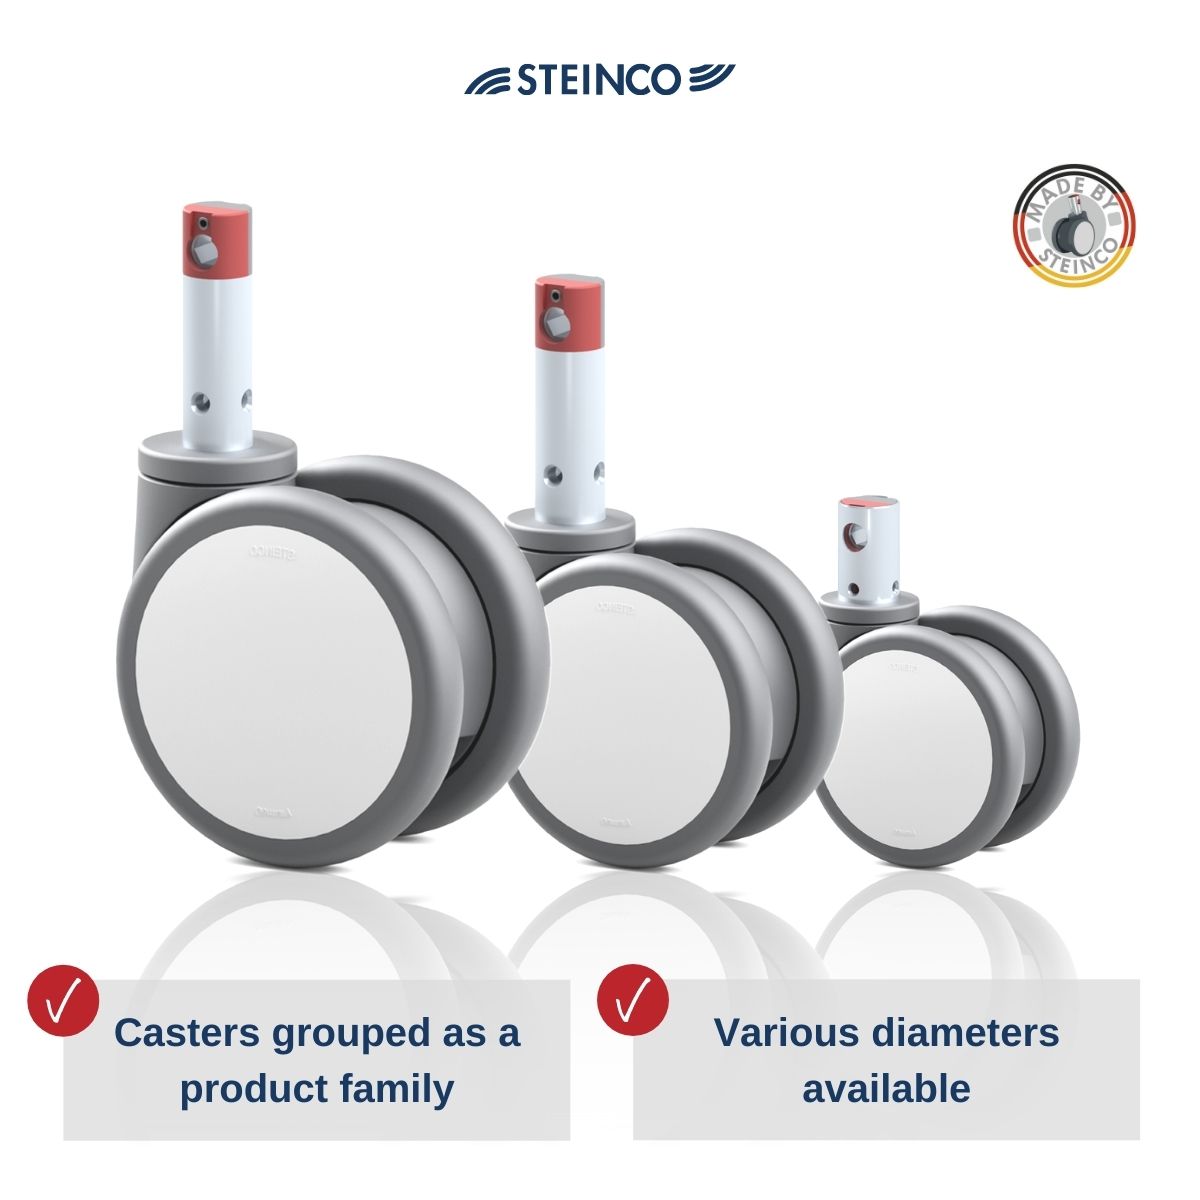 Steinco medical castors - free 3D models in many file formats for planners, designers, project engineers and product developers